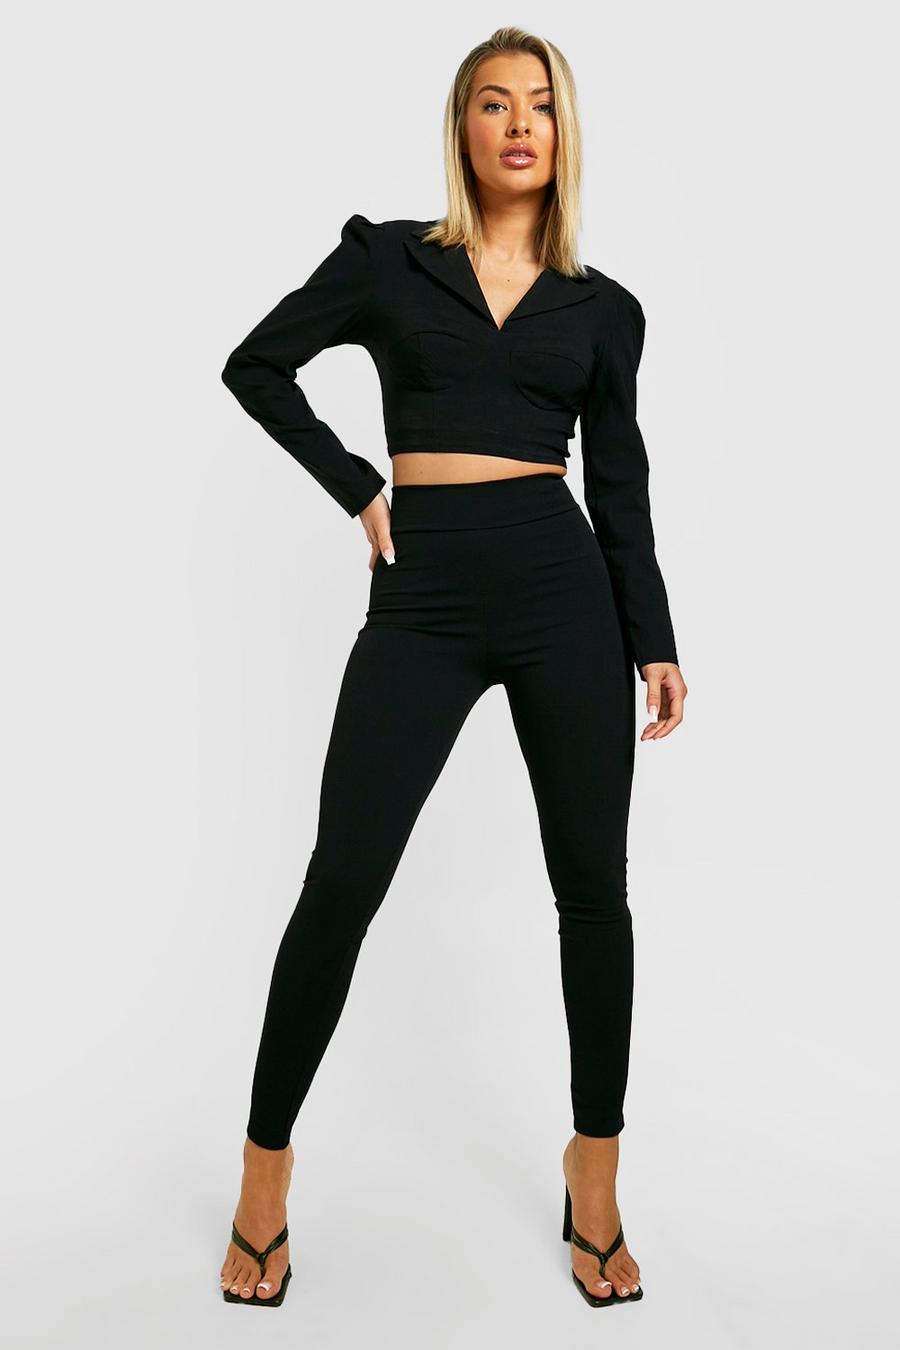 Black Cinched High Waisted Crepe Leggings